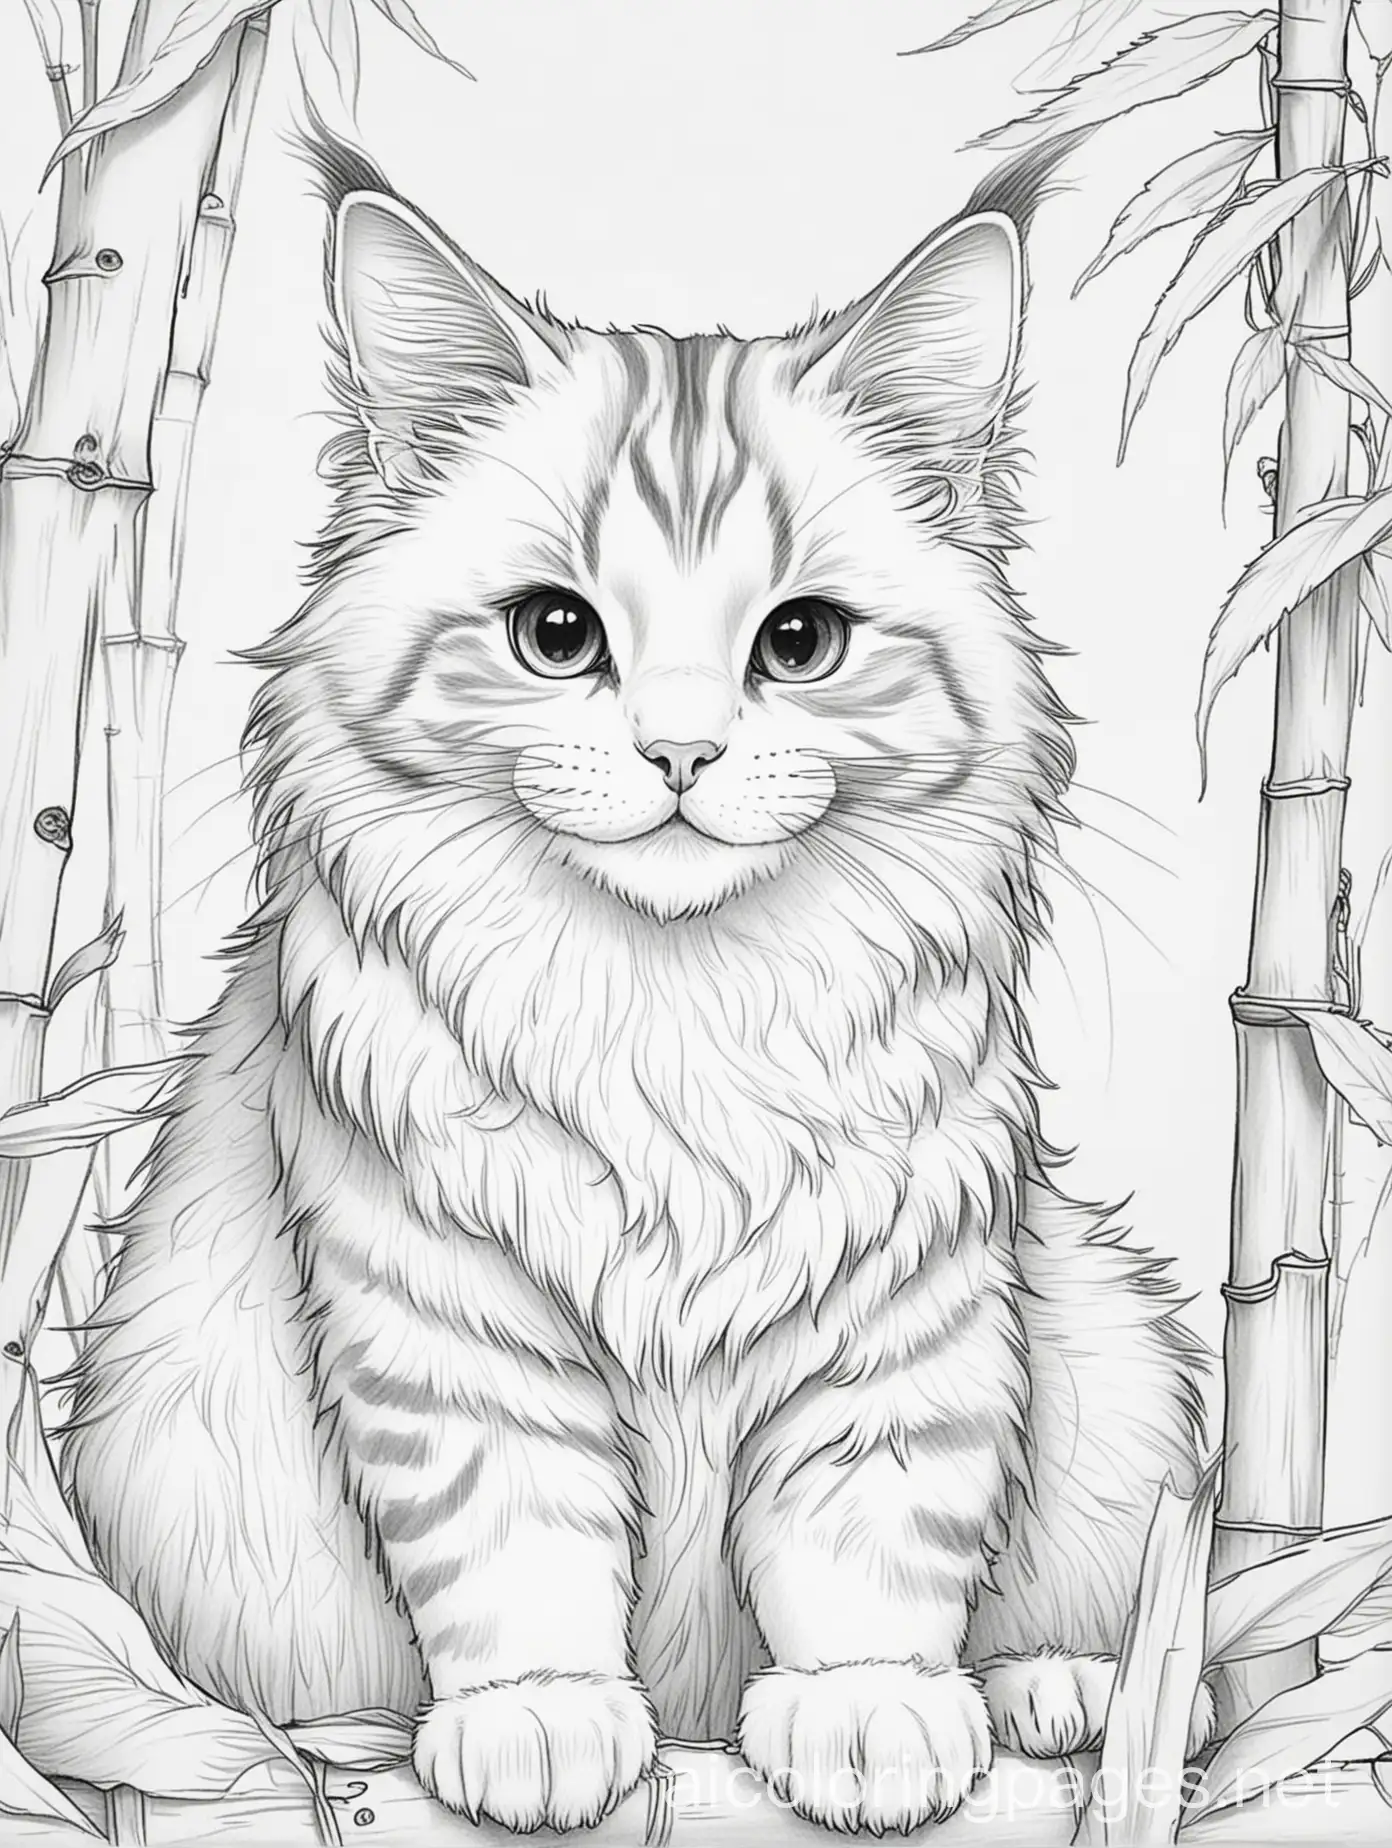 Adorable-Maine-Coon-Cat-Coloring-Page-Smiling-Feline-Enjoying-Bamboo-Treats